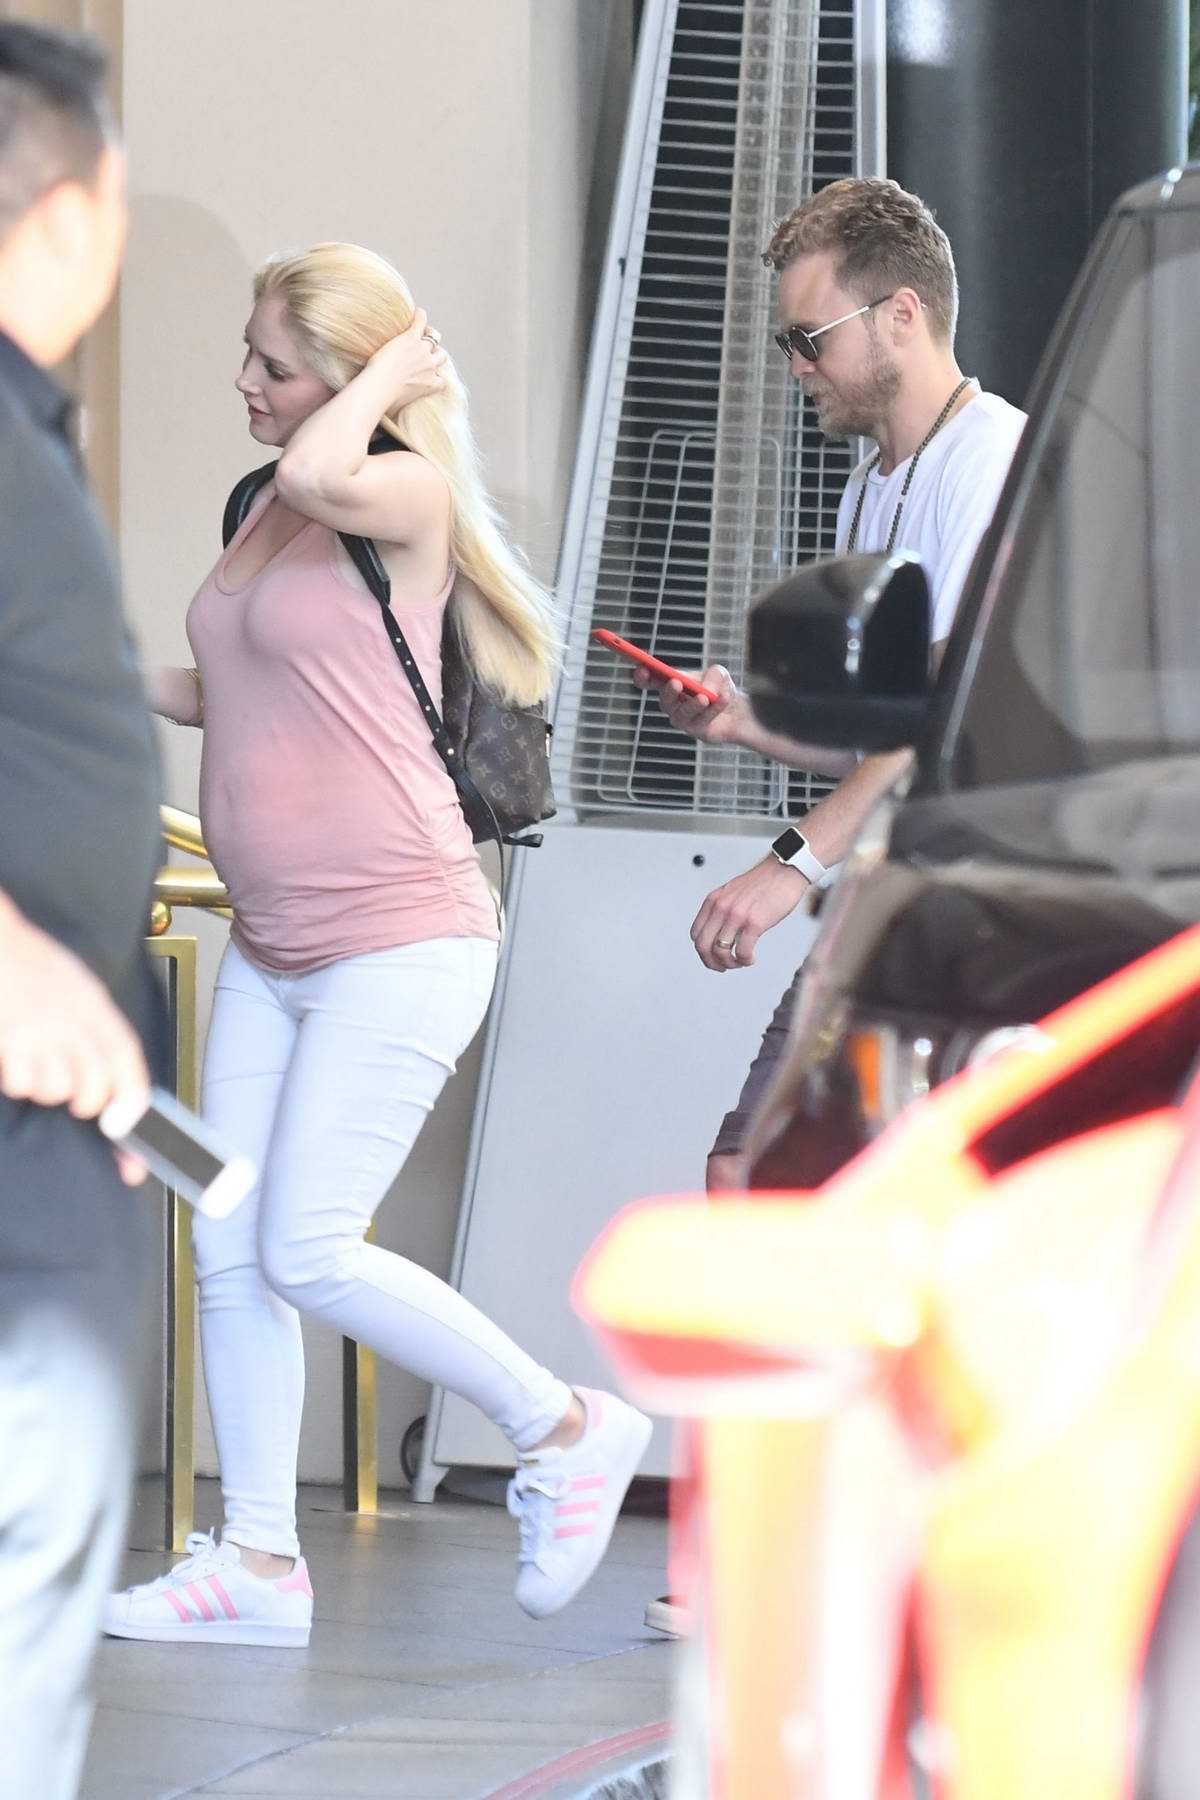 Heidi Montag Out For Lunch in West Hollywood May 1, 2009 – Star Style